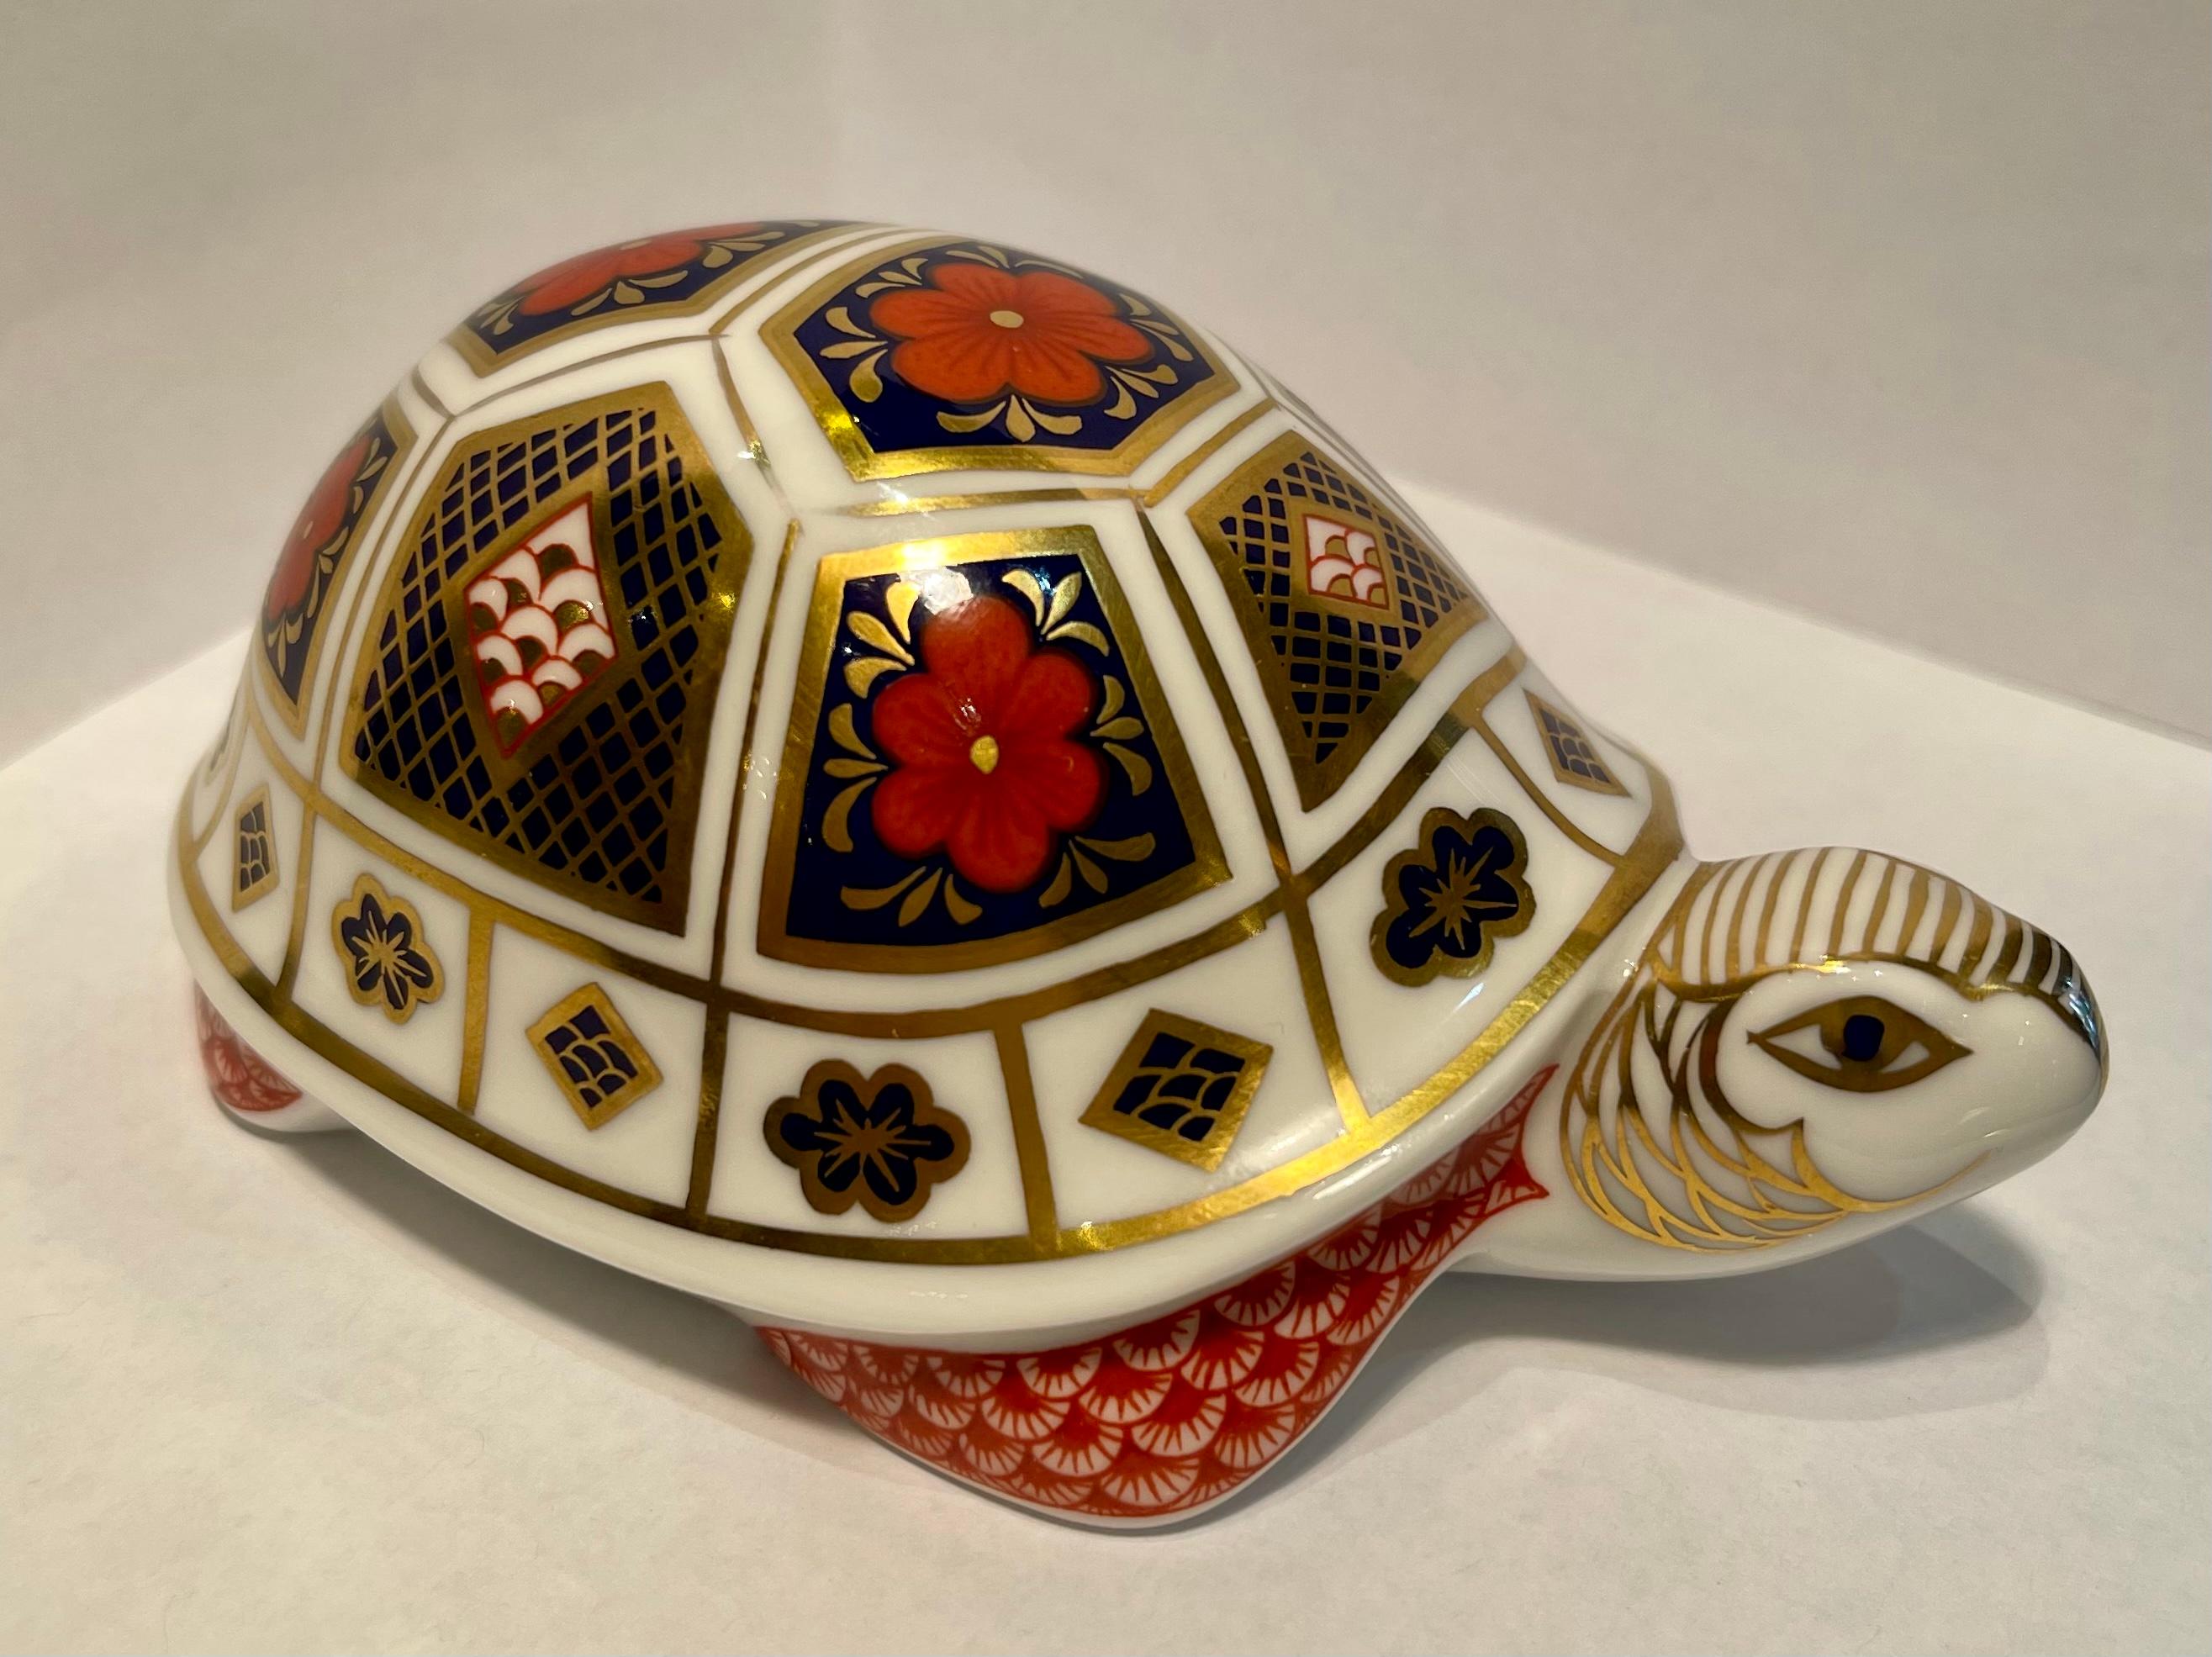 Very collectible, hand-made and hand-painted in England, retired Royal Crown Derby fine bone china turtle or tortoise figurine or paperweight. The turtle is richly decorated in rust, cobalt blue and accented with 22k gold in the famous Japonisme